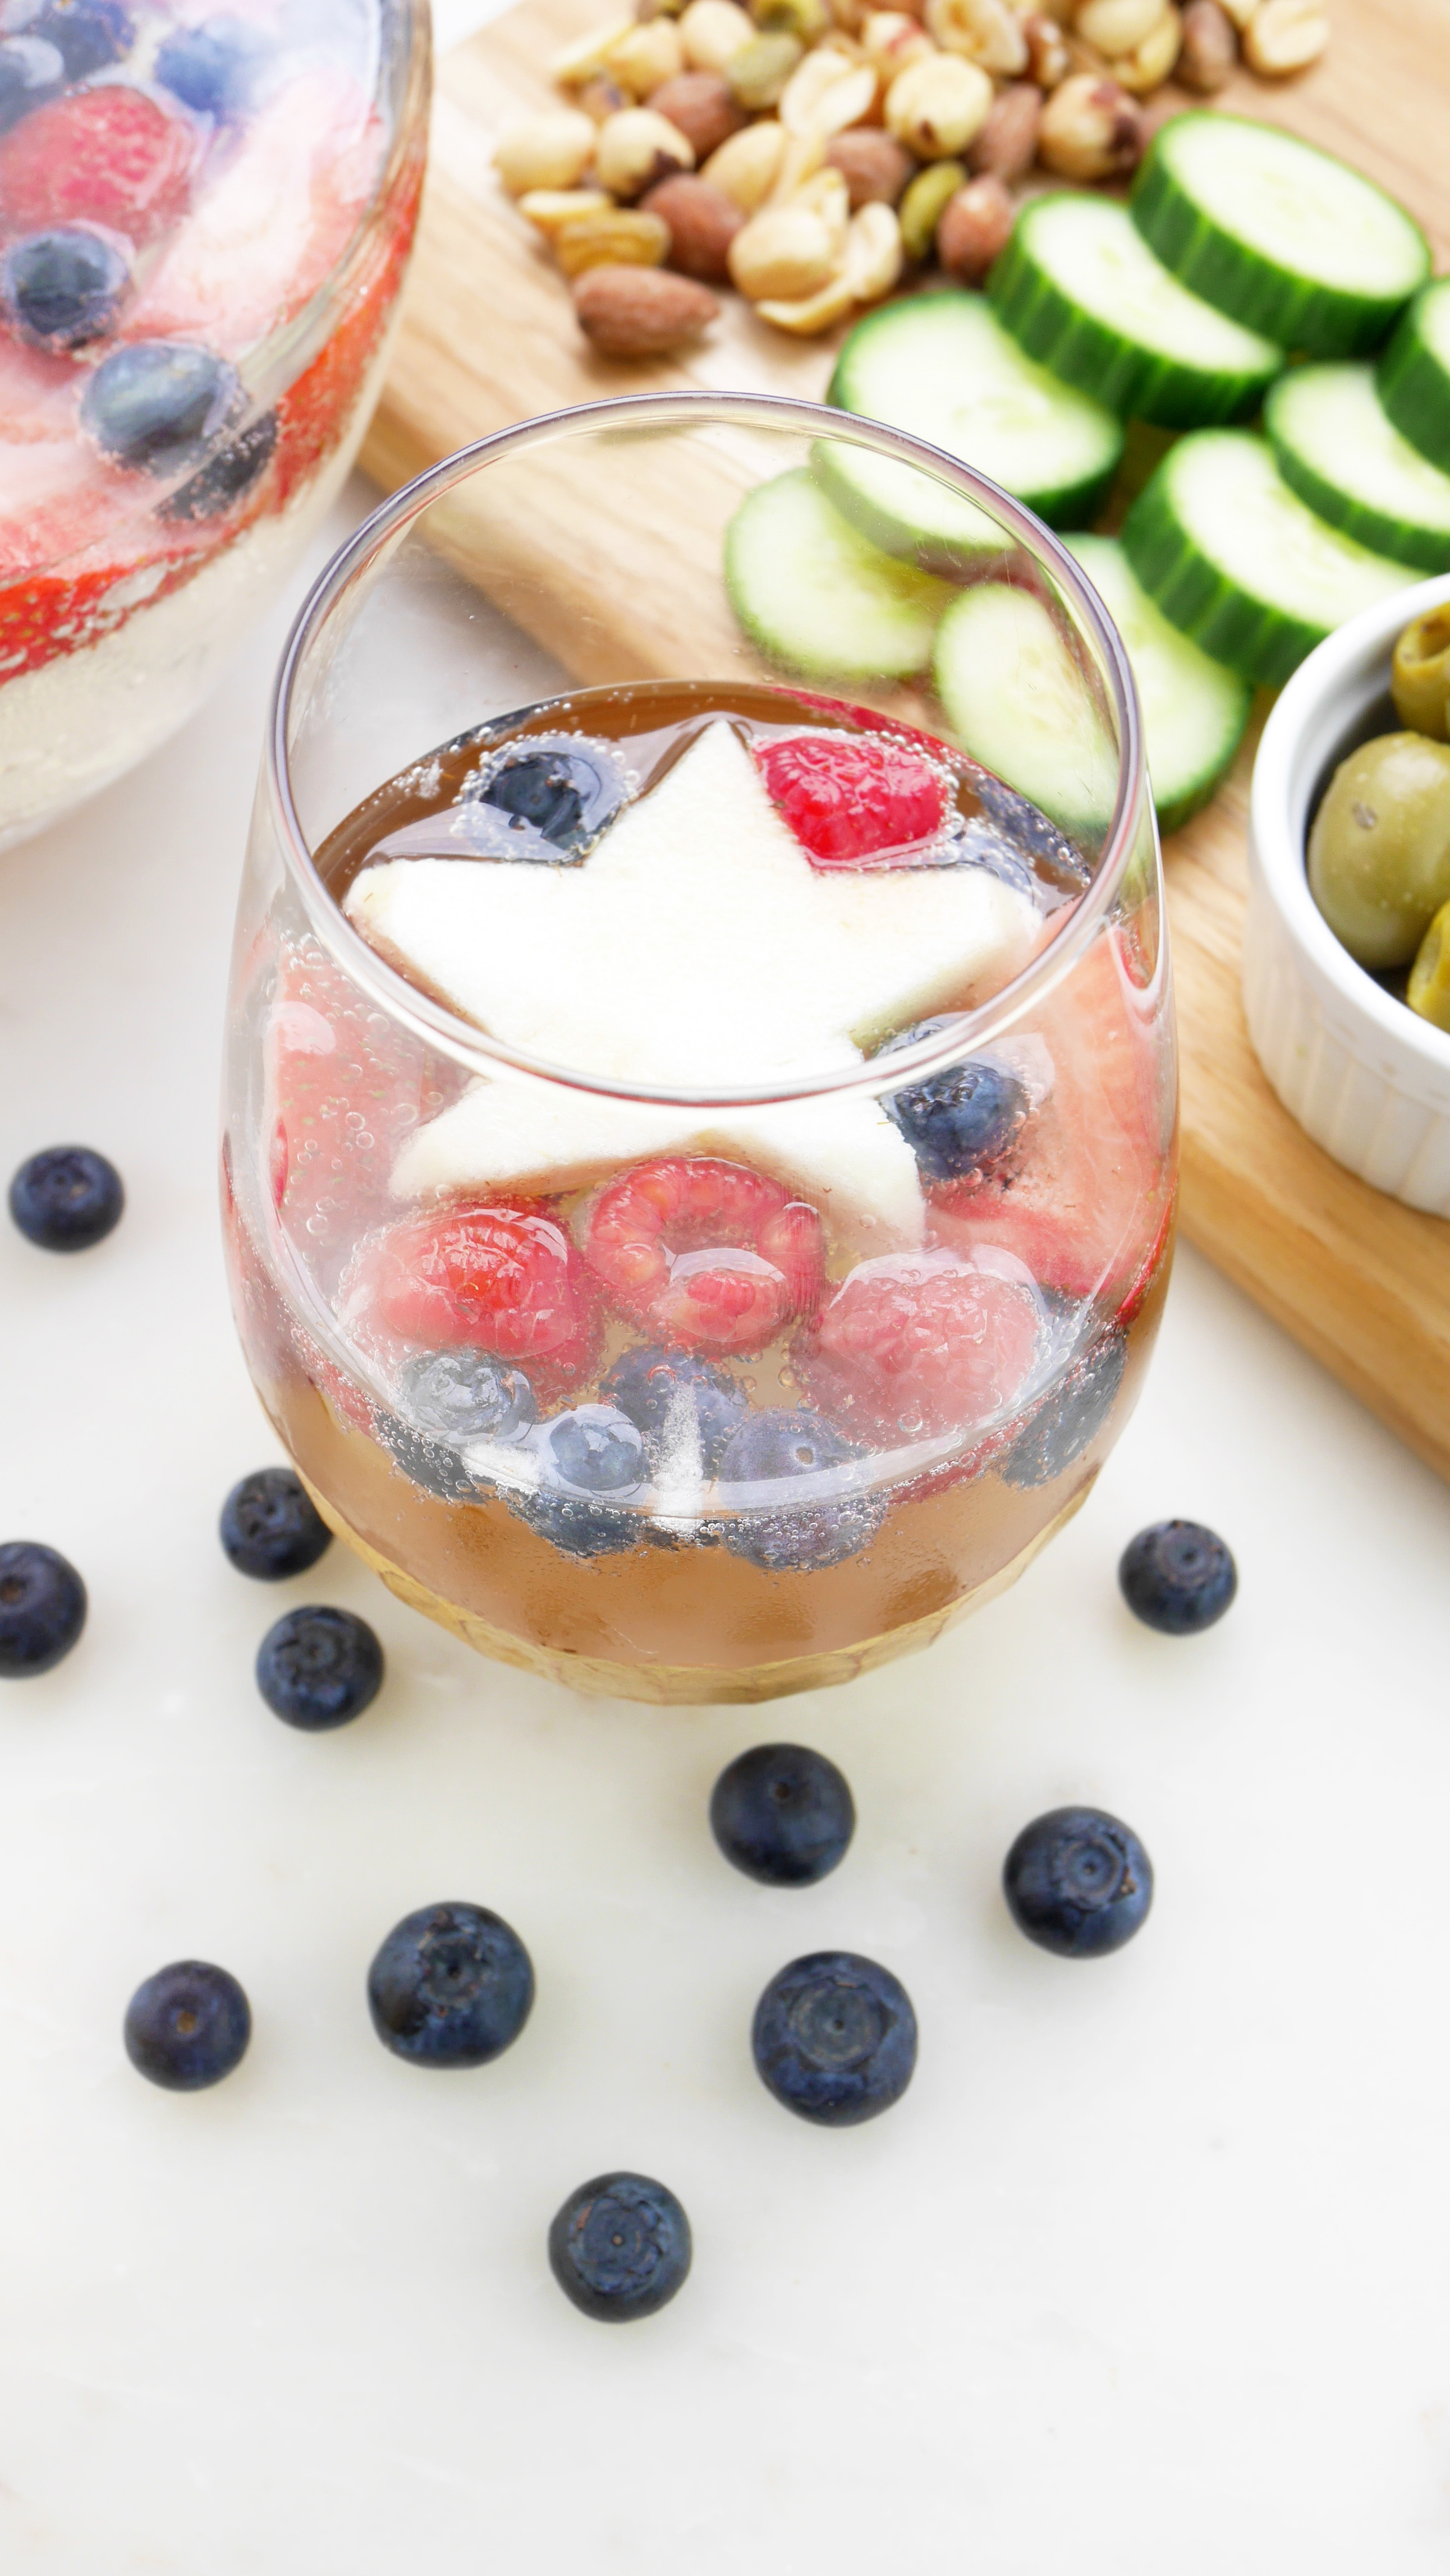 In The Raw Stevia Red White and Blue Wine Spritzers